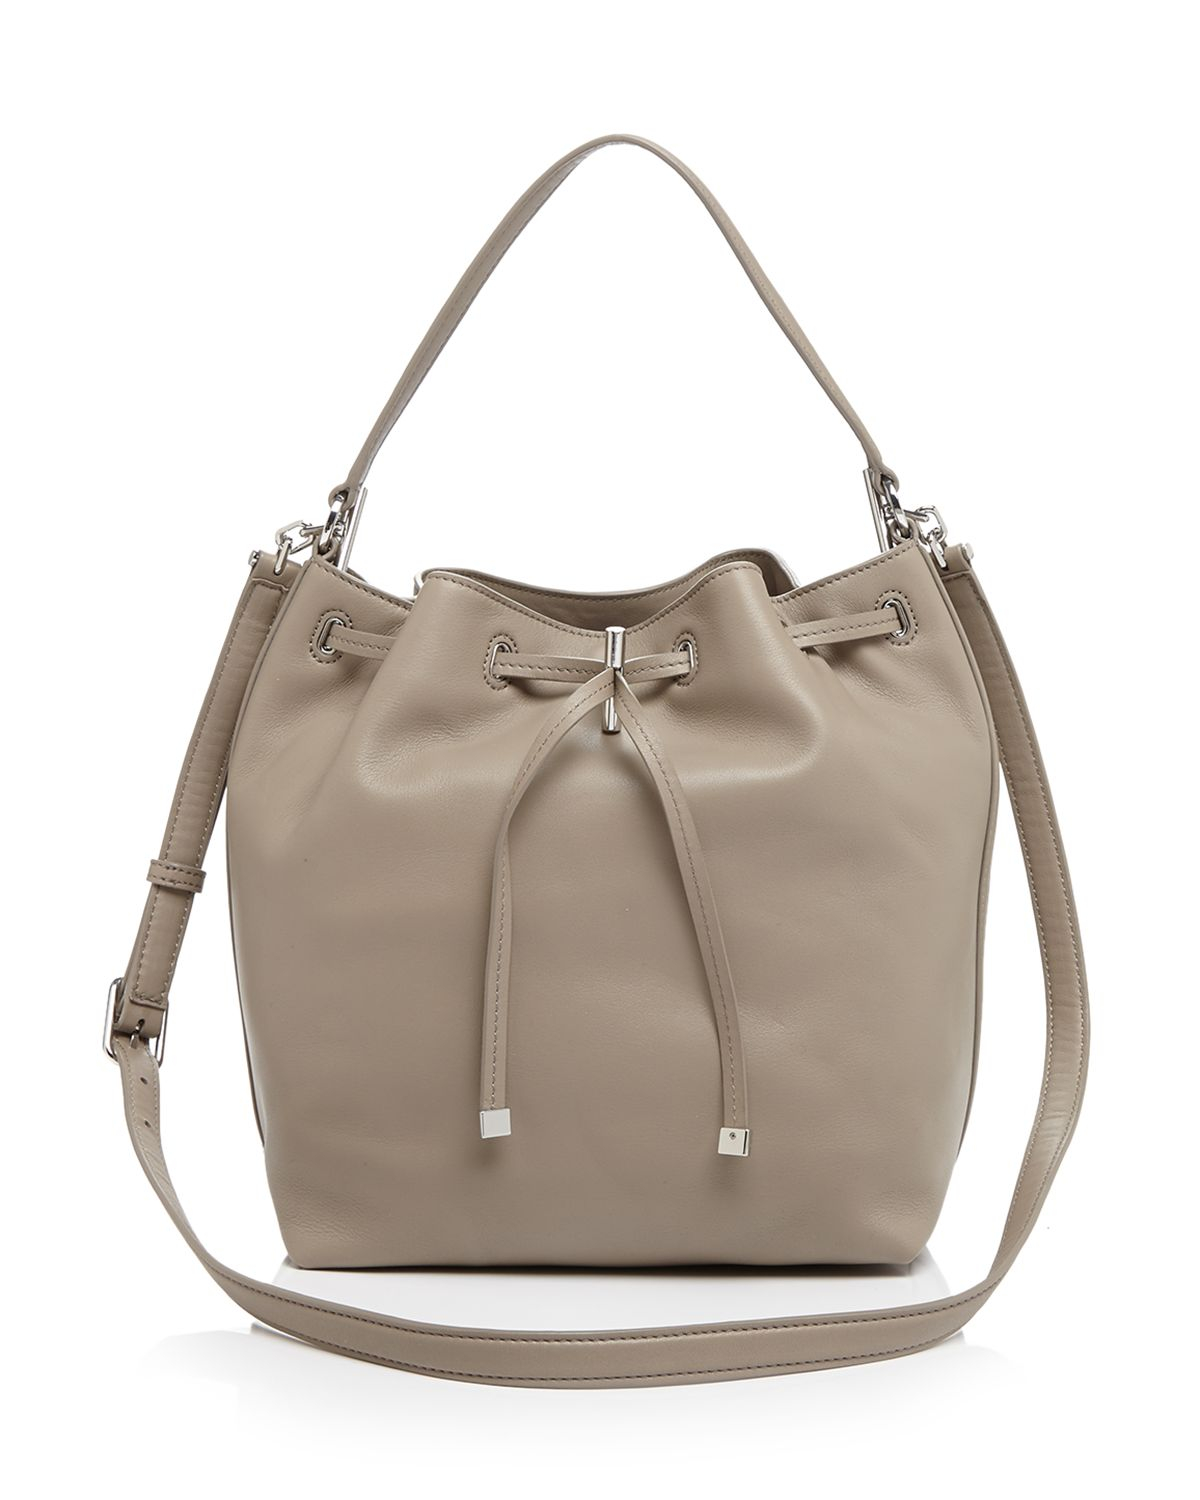 Tory burch Shoulder Bag - Toggle Drawstring Bucket in Gray | Lyst